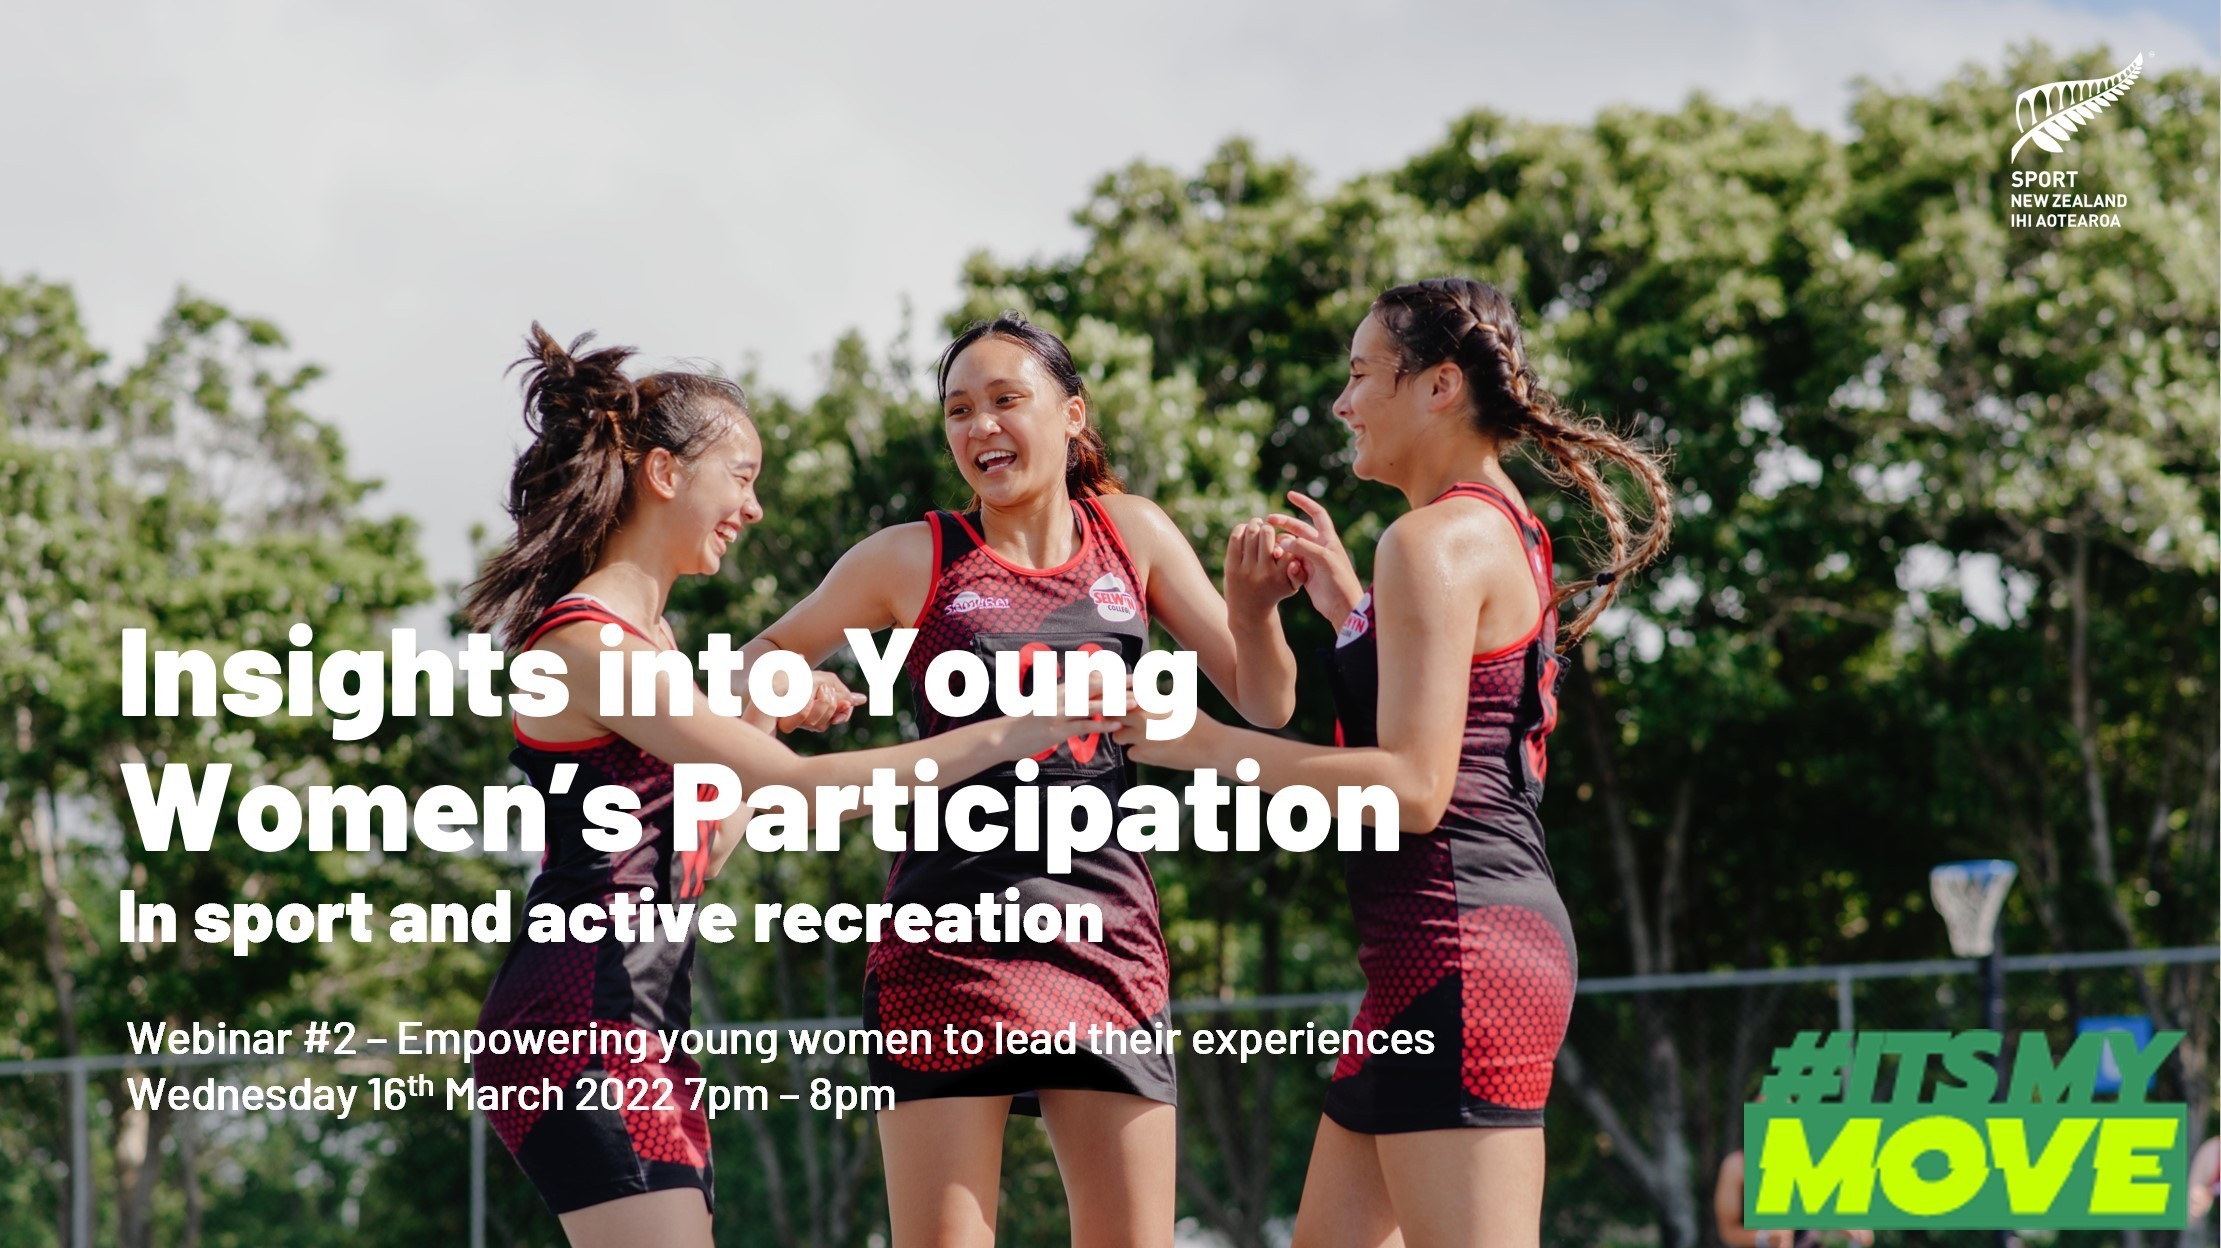 Insights to Young Women’s Participation - Webinar #2 "Empowering young women to lead their experiences"